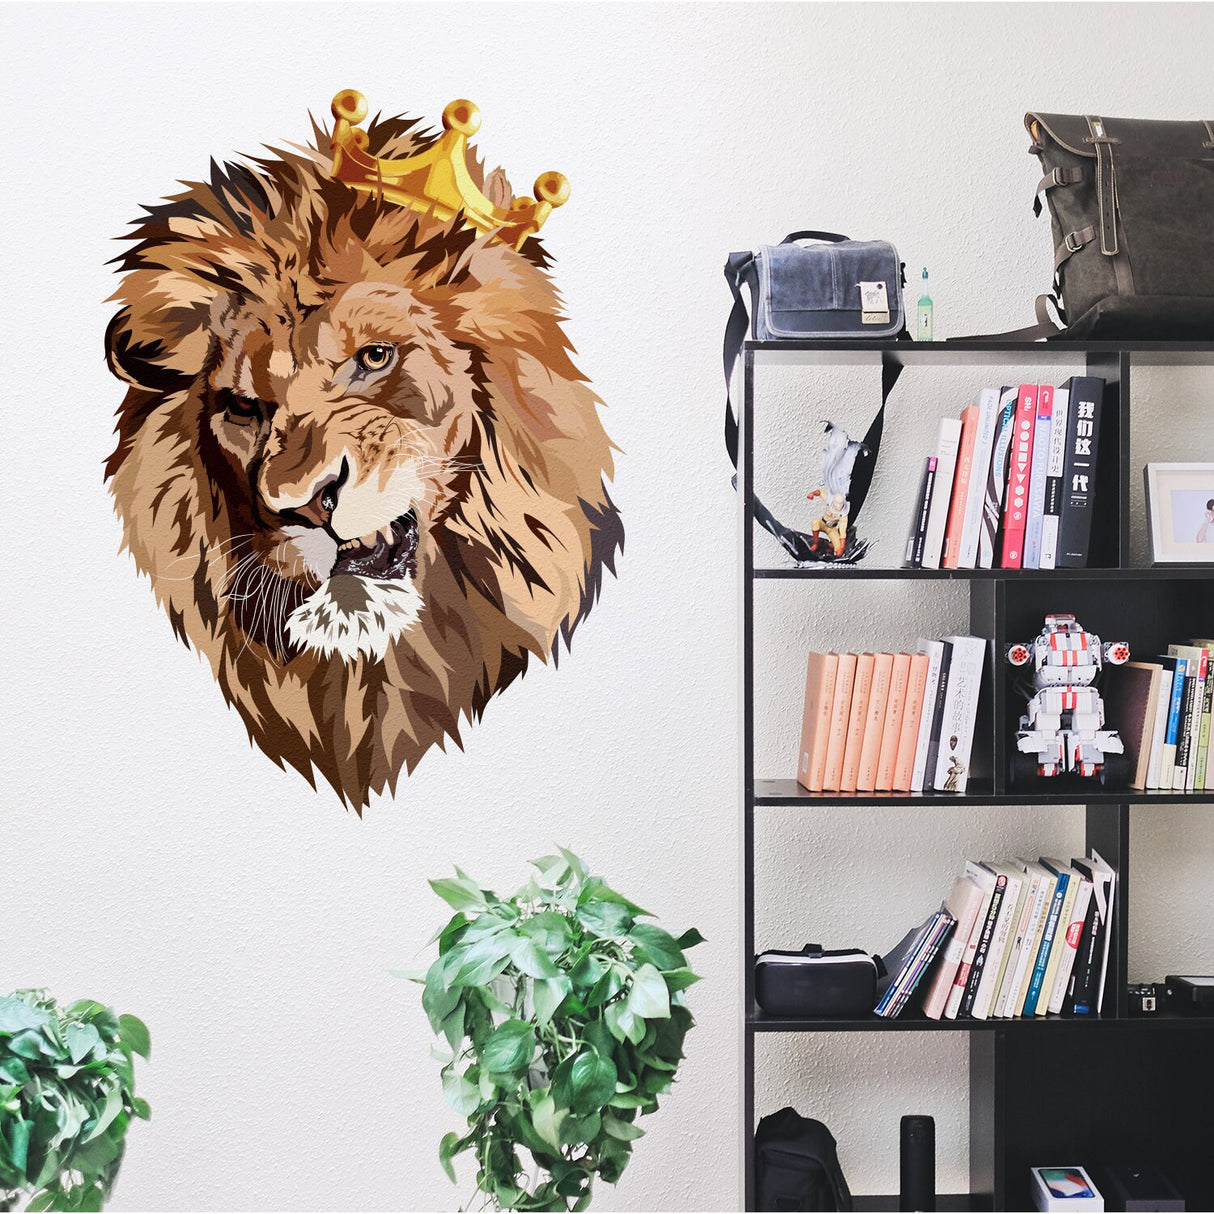 Lion King With Crown Vinyl Wall Sticker - Funny Lions Head Cut Seal Art Decal